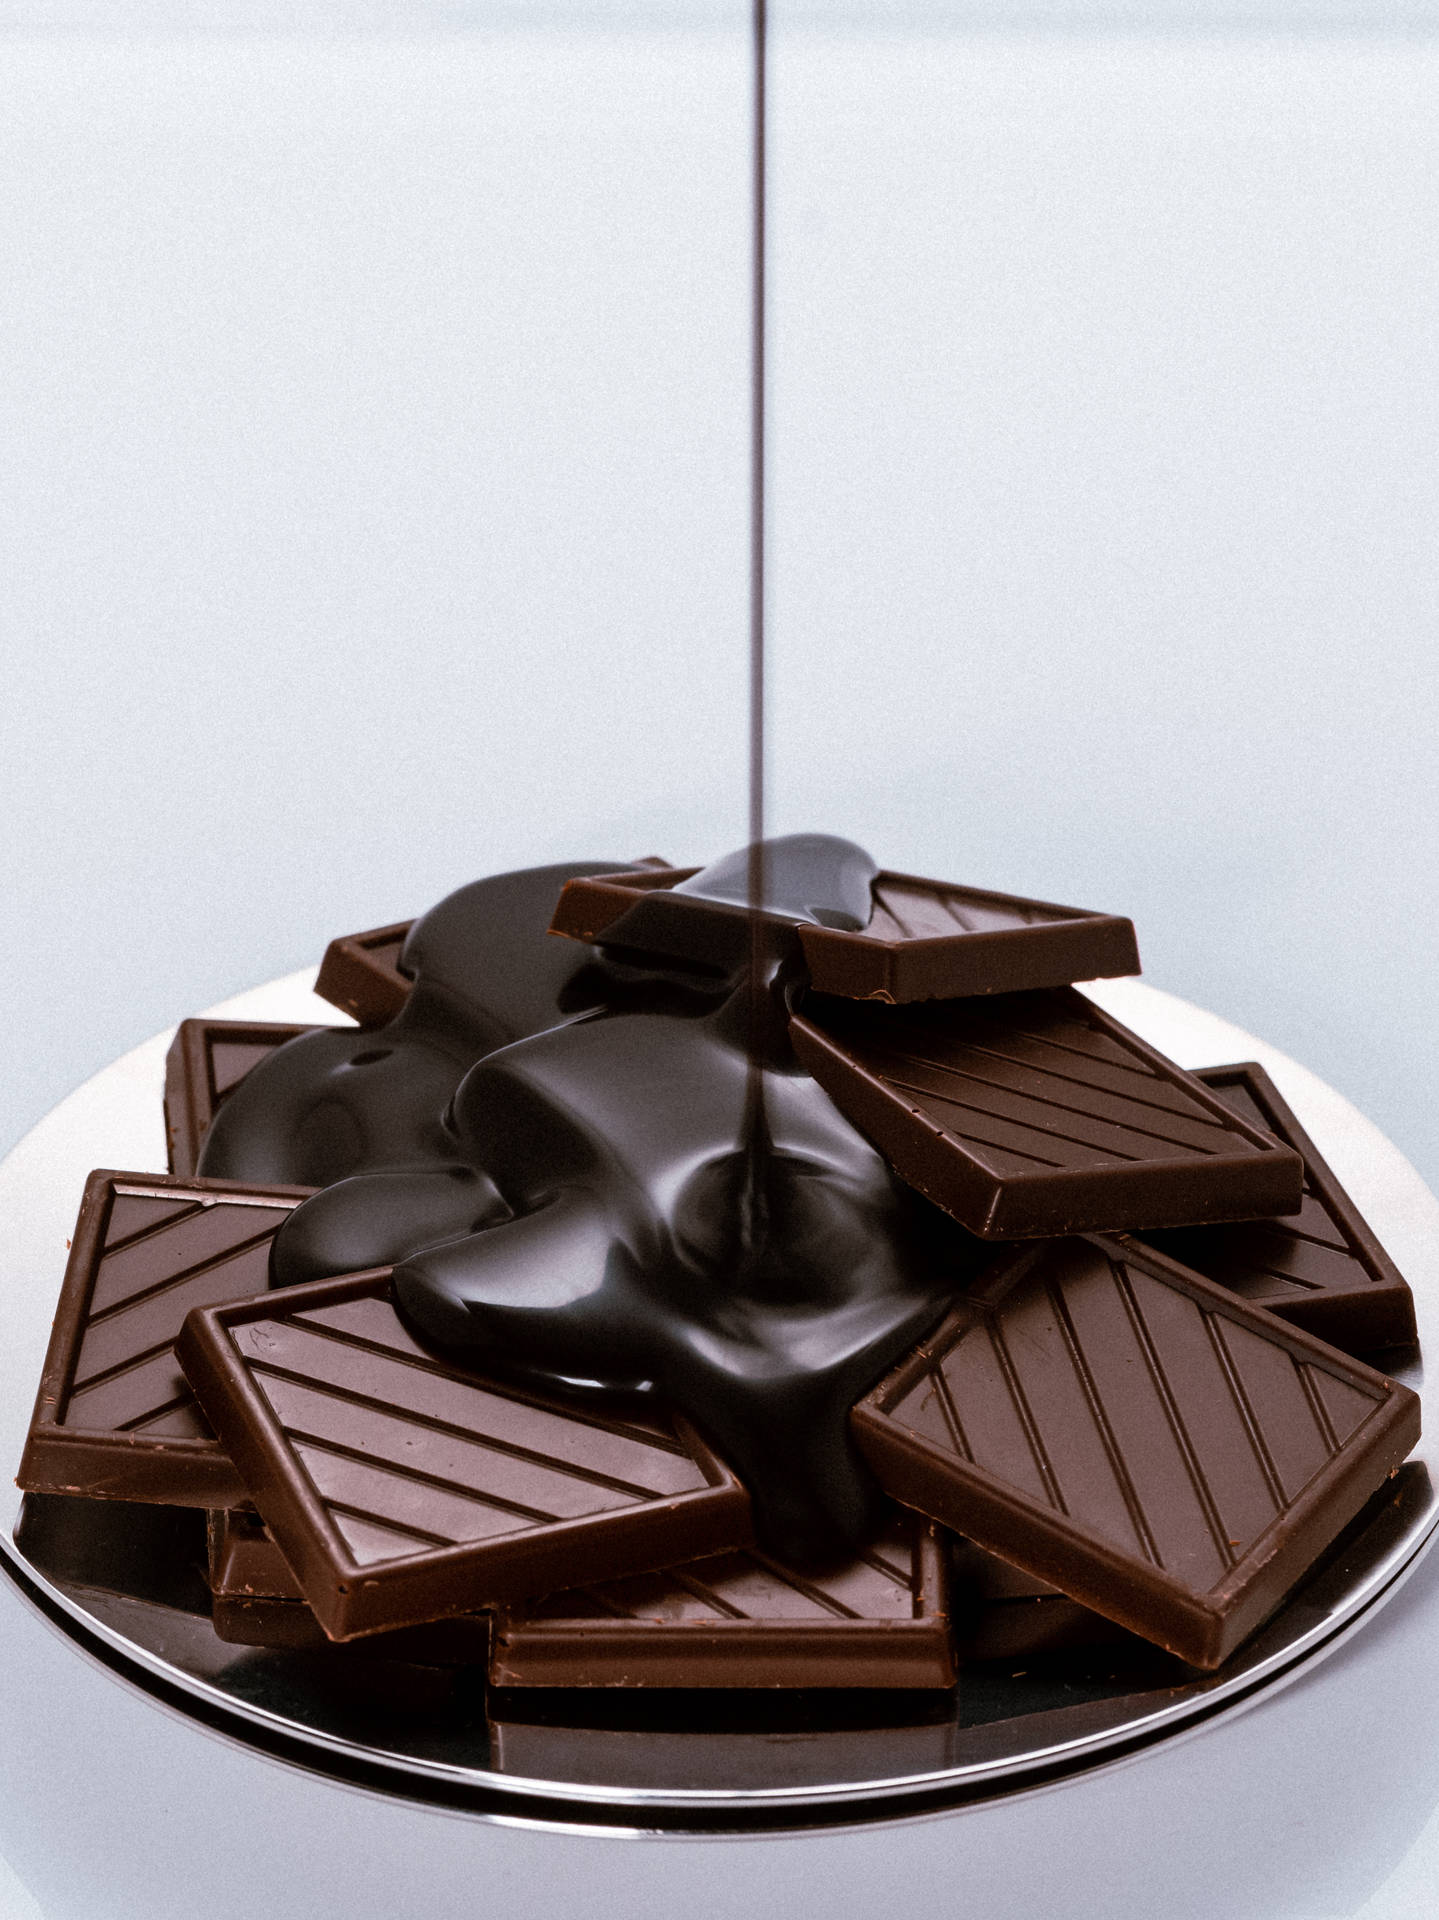 Chocolate Wallpapers